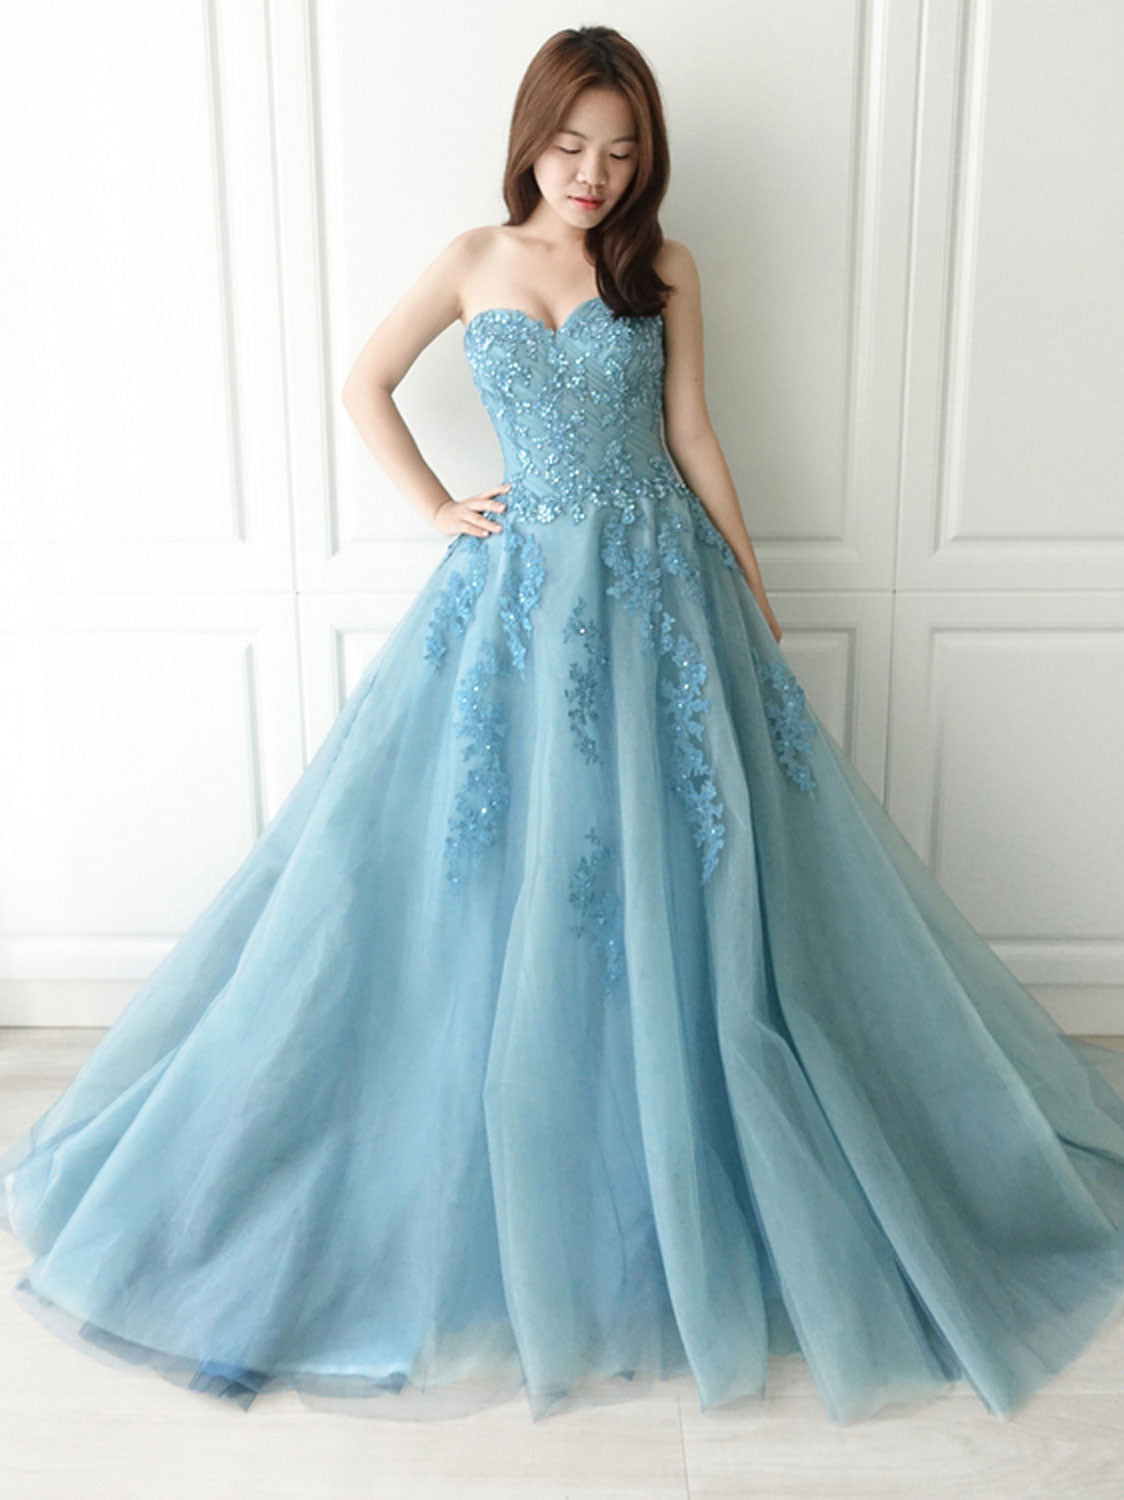 Blue sweetheart neck tulle lace long prom dress, blue tulle formal dress